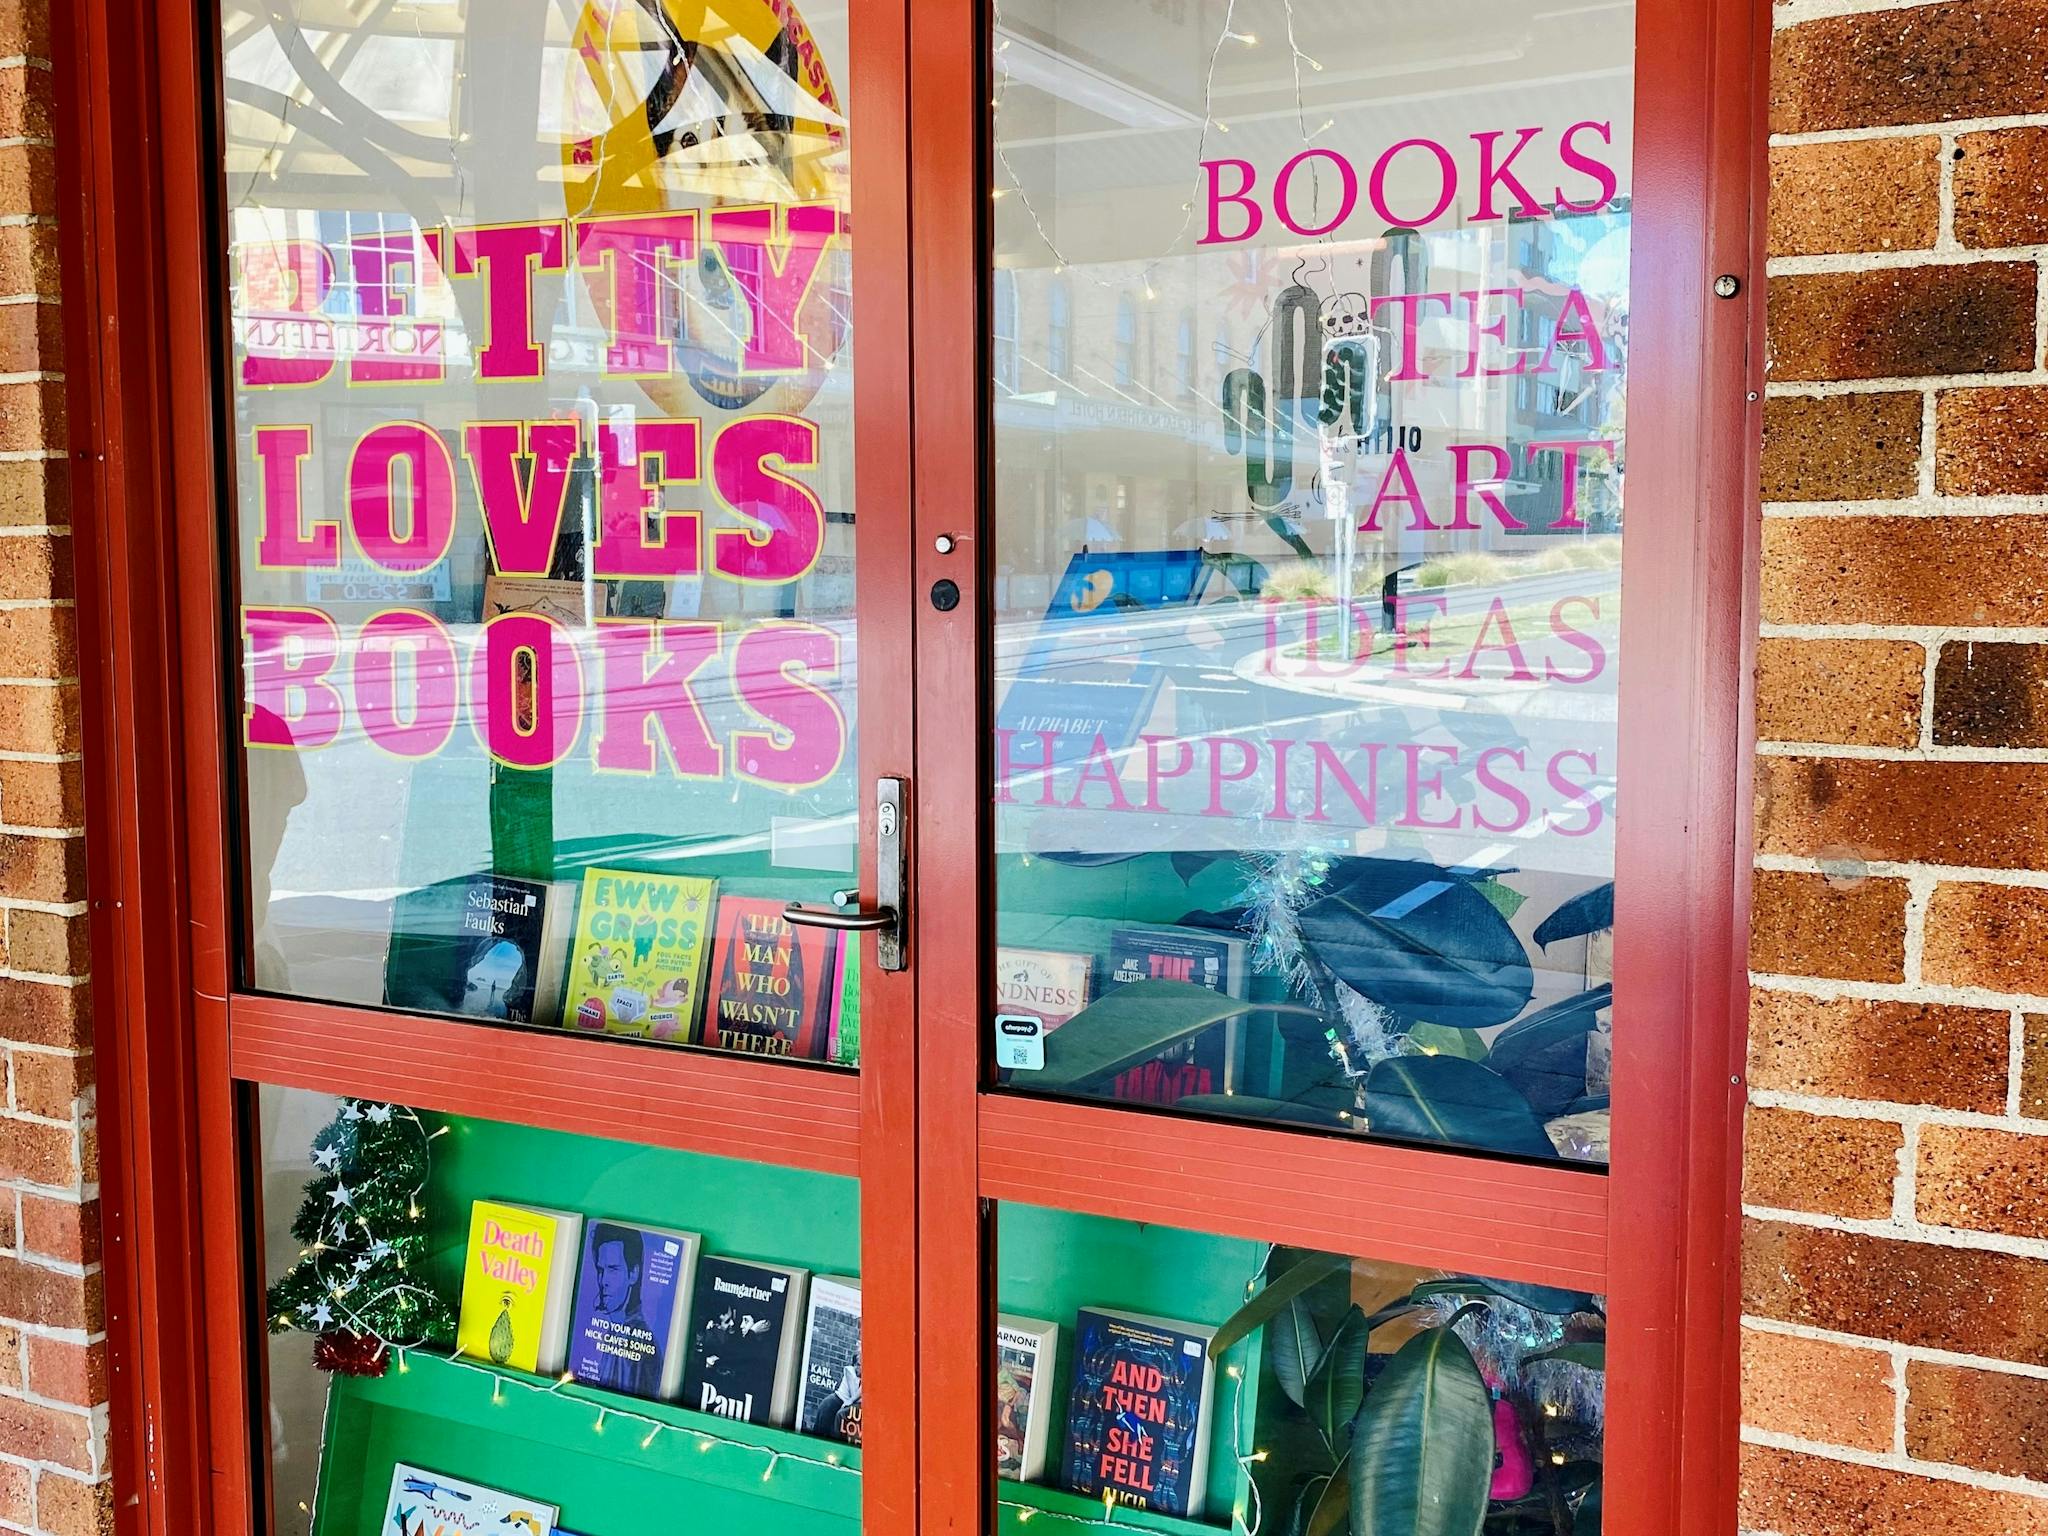 A window display saying Betty Loves Books and books, tea, art, happiness